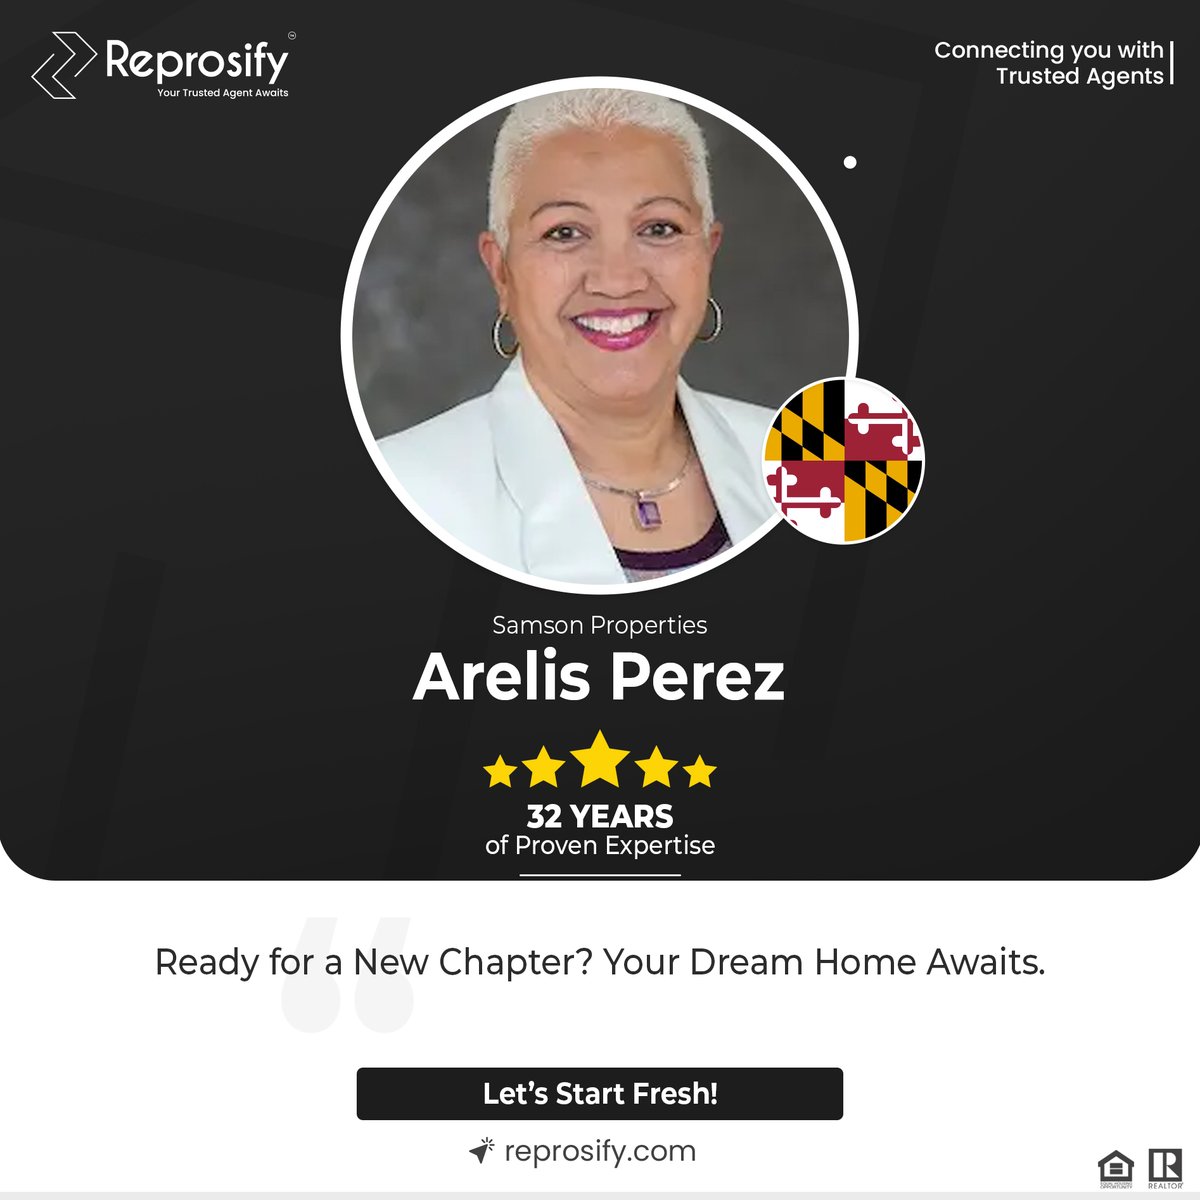 Enter the world of opulence in Maryland with Arelis Perez - find your sanctuary now!

👤agents.reprosify.com/arelis-perez

#Reprosify #AgentsReprosify #SamsonProperties #ArelisPerez #realestate #realtor #realestateagent #Broker #Marylandrealestate #Bethesdarealestate